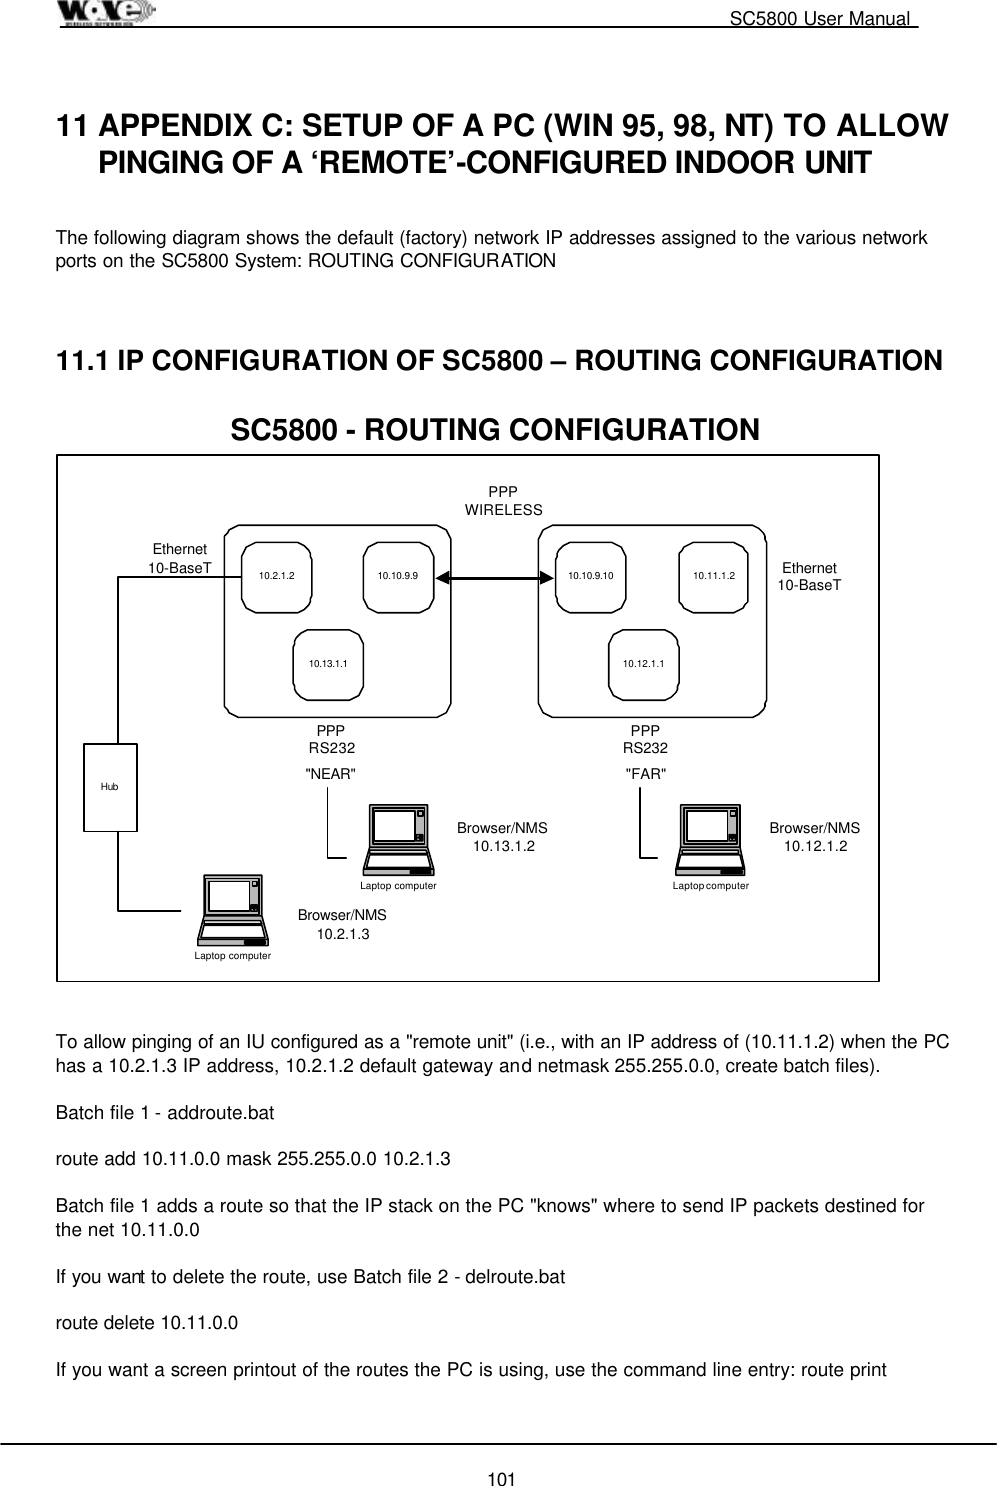                                                                                                   SC5800 User Manual  101  11 APPENDIX C: SETUP OF A PC (WIN 95, 98, NT) TO ALLOW PINGING OF A ‘REMOTE’-CONFIGURED INDOOR UNIT  The following diagram shows the default (factory) network IP addresses assigned to the various network ports on the SC5800 System: ROUTING CONFIGURATION    11.1 IP CONFIGURATION OF SC5800 – ROUTING CONFIGURATION  10.2.1.2 10.10.9.910.13.1.110.10.9.10 10.11.1.210.12.1.1Ethernet10-BaseTPPPRS232PPPWIRELESSPPPRS232Ethernet10-BaseT&quot;NEAR&quot; &quot;FAR&quot;Laptop computerBrowser/NMS10.2.1.3HubSC5800 - ROUTING CONFIGURATIONLaptop computerBrowser/NMS10.12.1.2Laptop computerBrowser/NMS10.13.1.2   To allow pinging of an IU configured as a &quot;remote unit&quot; (i.e., with an IP address of (10.11.1.2) when the PC has a 10.2.1.3 IP address, 10.2.1.2 default gateway and netmask 255.255.0.0, create batch files).    Batch file 1 - addroute.bat  route add 10.11.0.0 mask 255.255.0.0 10.2.1.3  Batch file 1 adds a route so that the IP stack on the PC &quot;knows&quot; where to send IP packets destined for the net 10.11.0.0   If you want to delete the route, use Batch file 2 - delroute.bat  route delete 10.11.0.0  If you want a screen printout of the routes the PC is using, use the command line entry: route print  